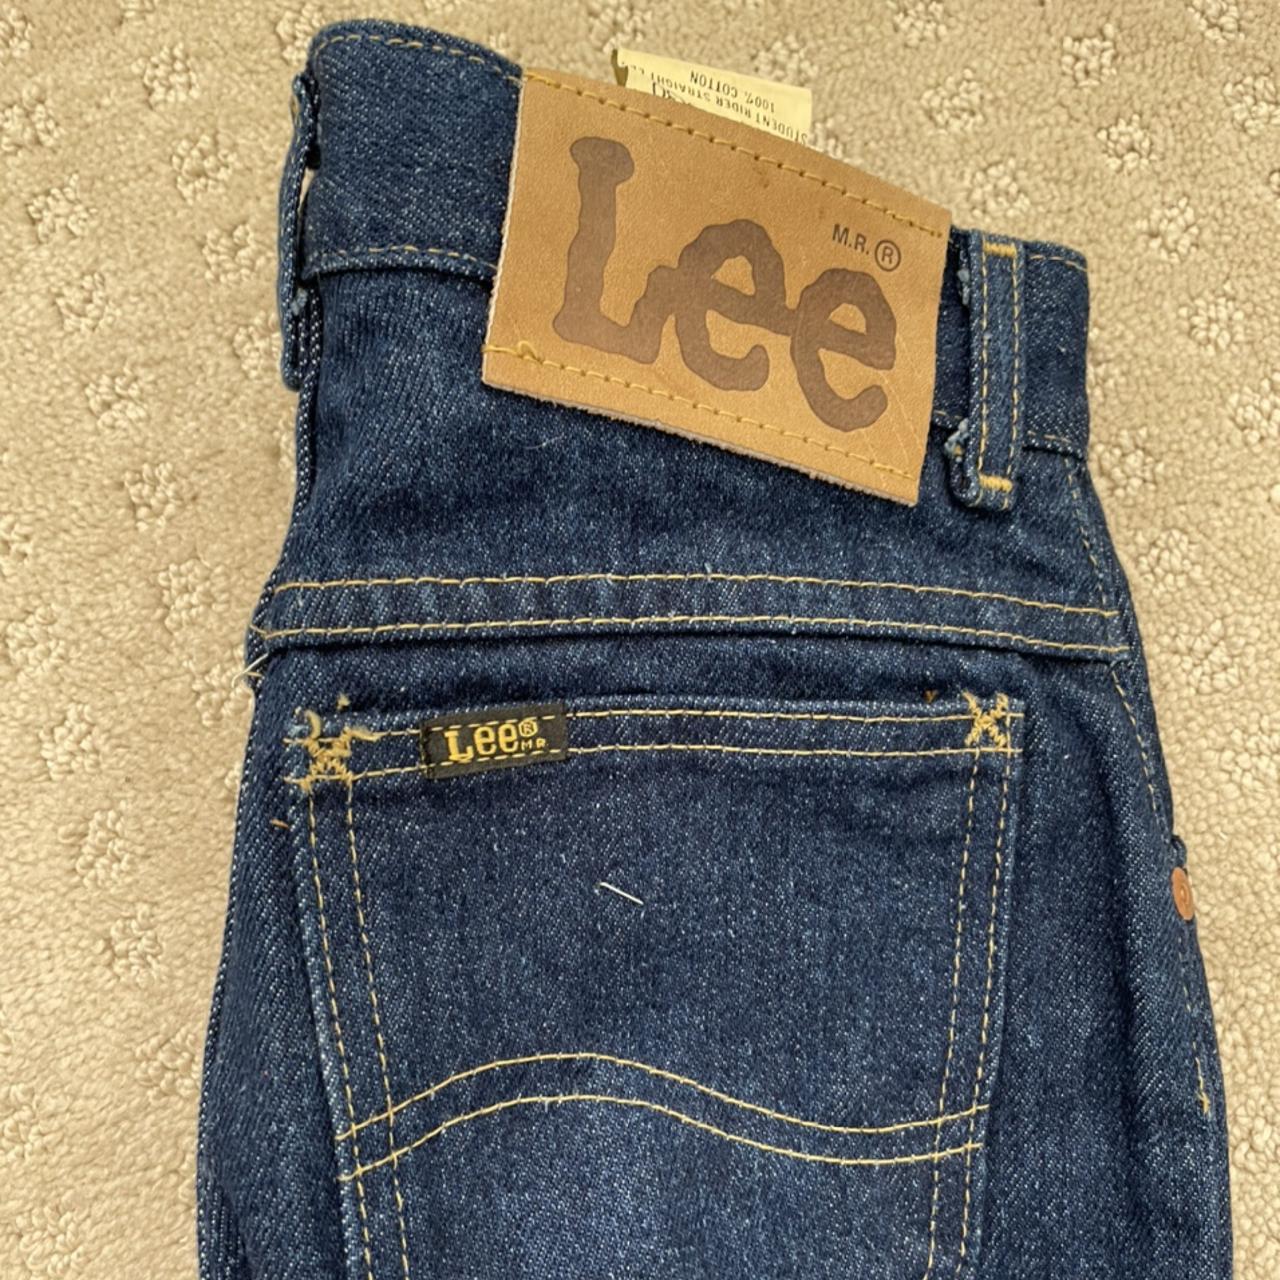 Brad new Lee jeans,, too small for me,, but super... - Depop